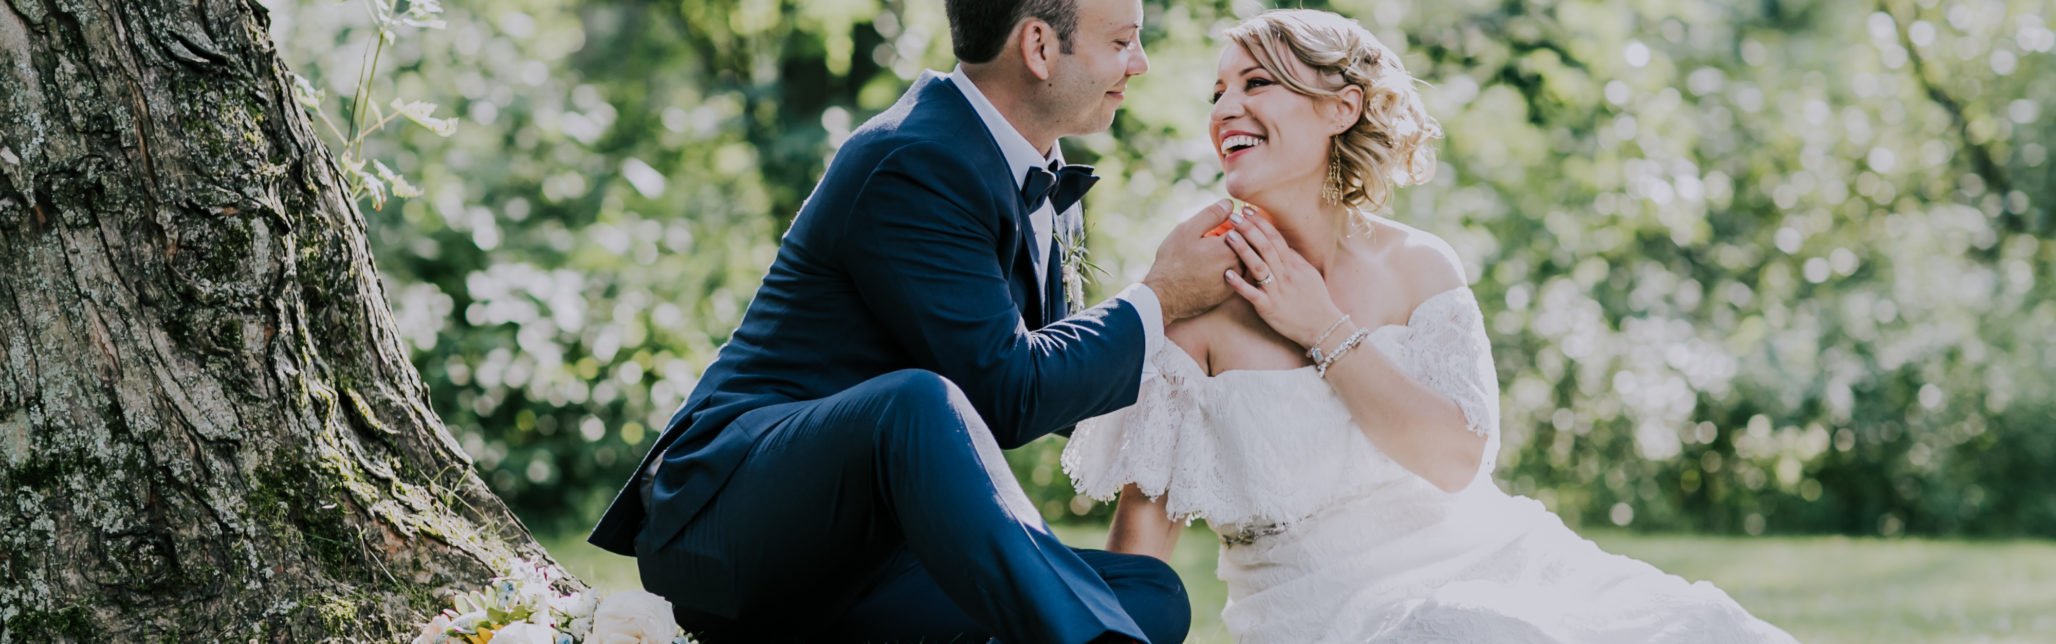 bride and groom sit on grass laughing